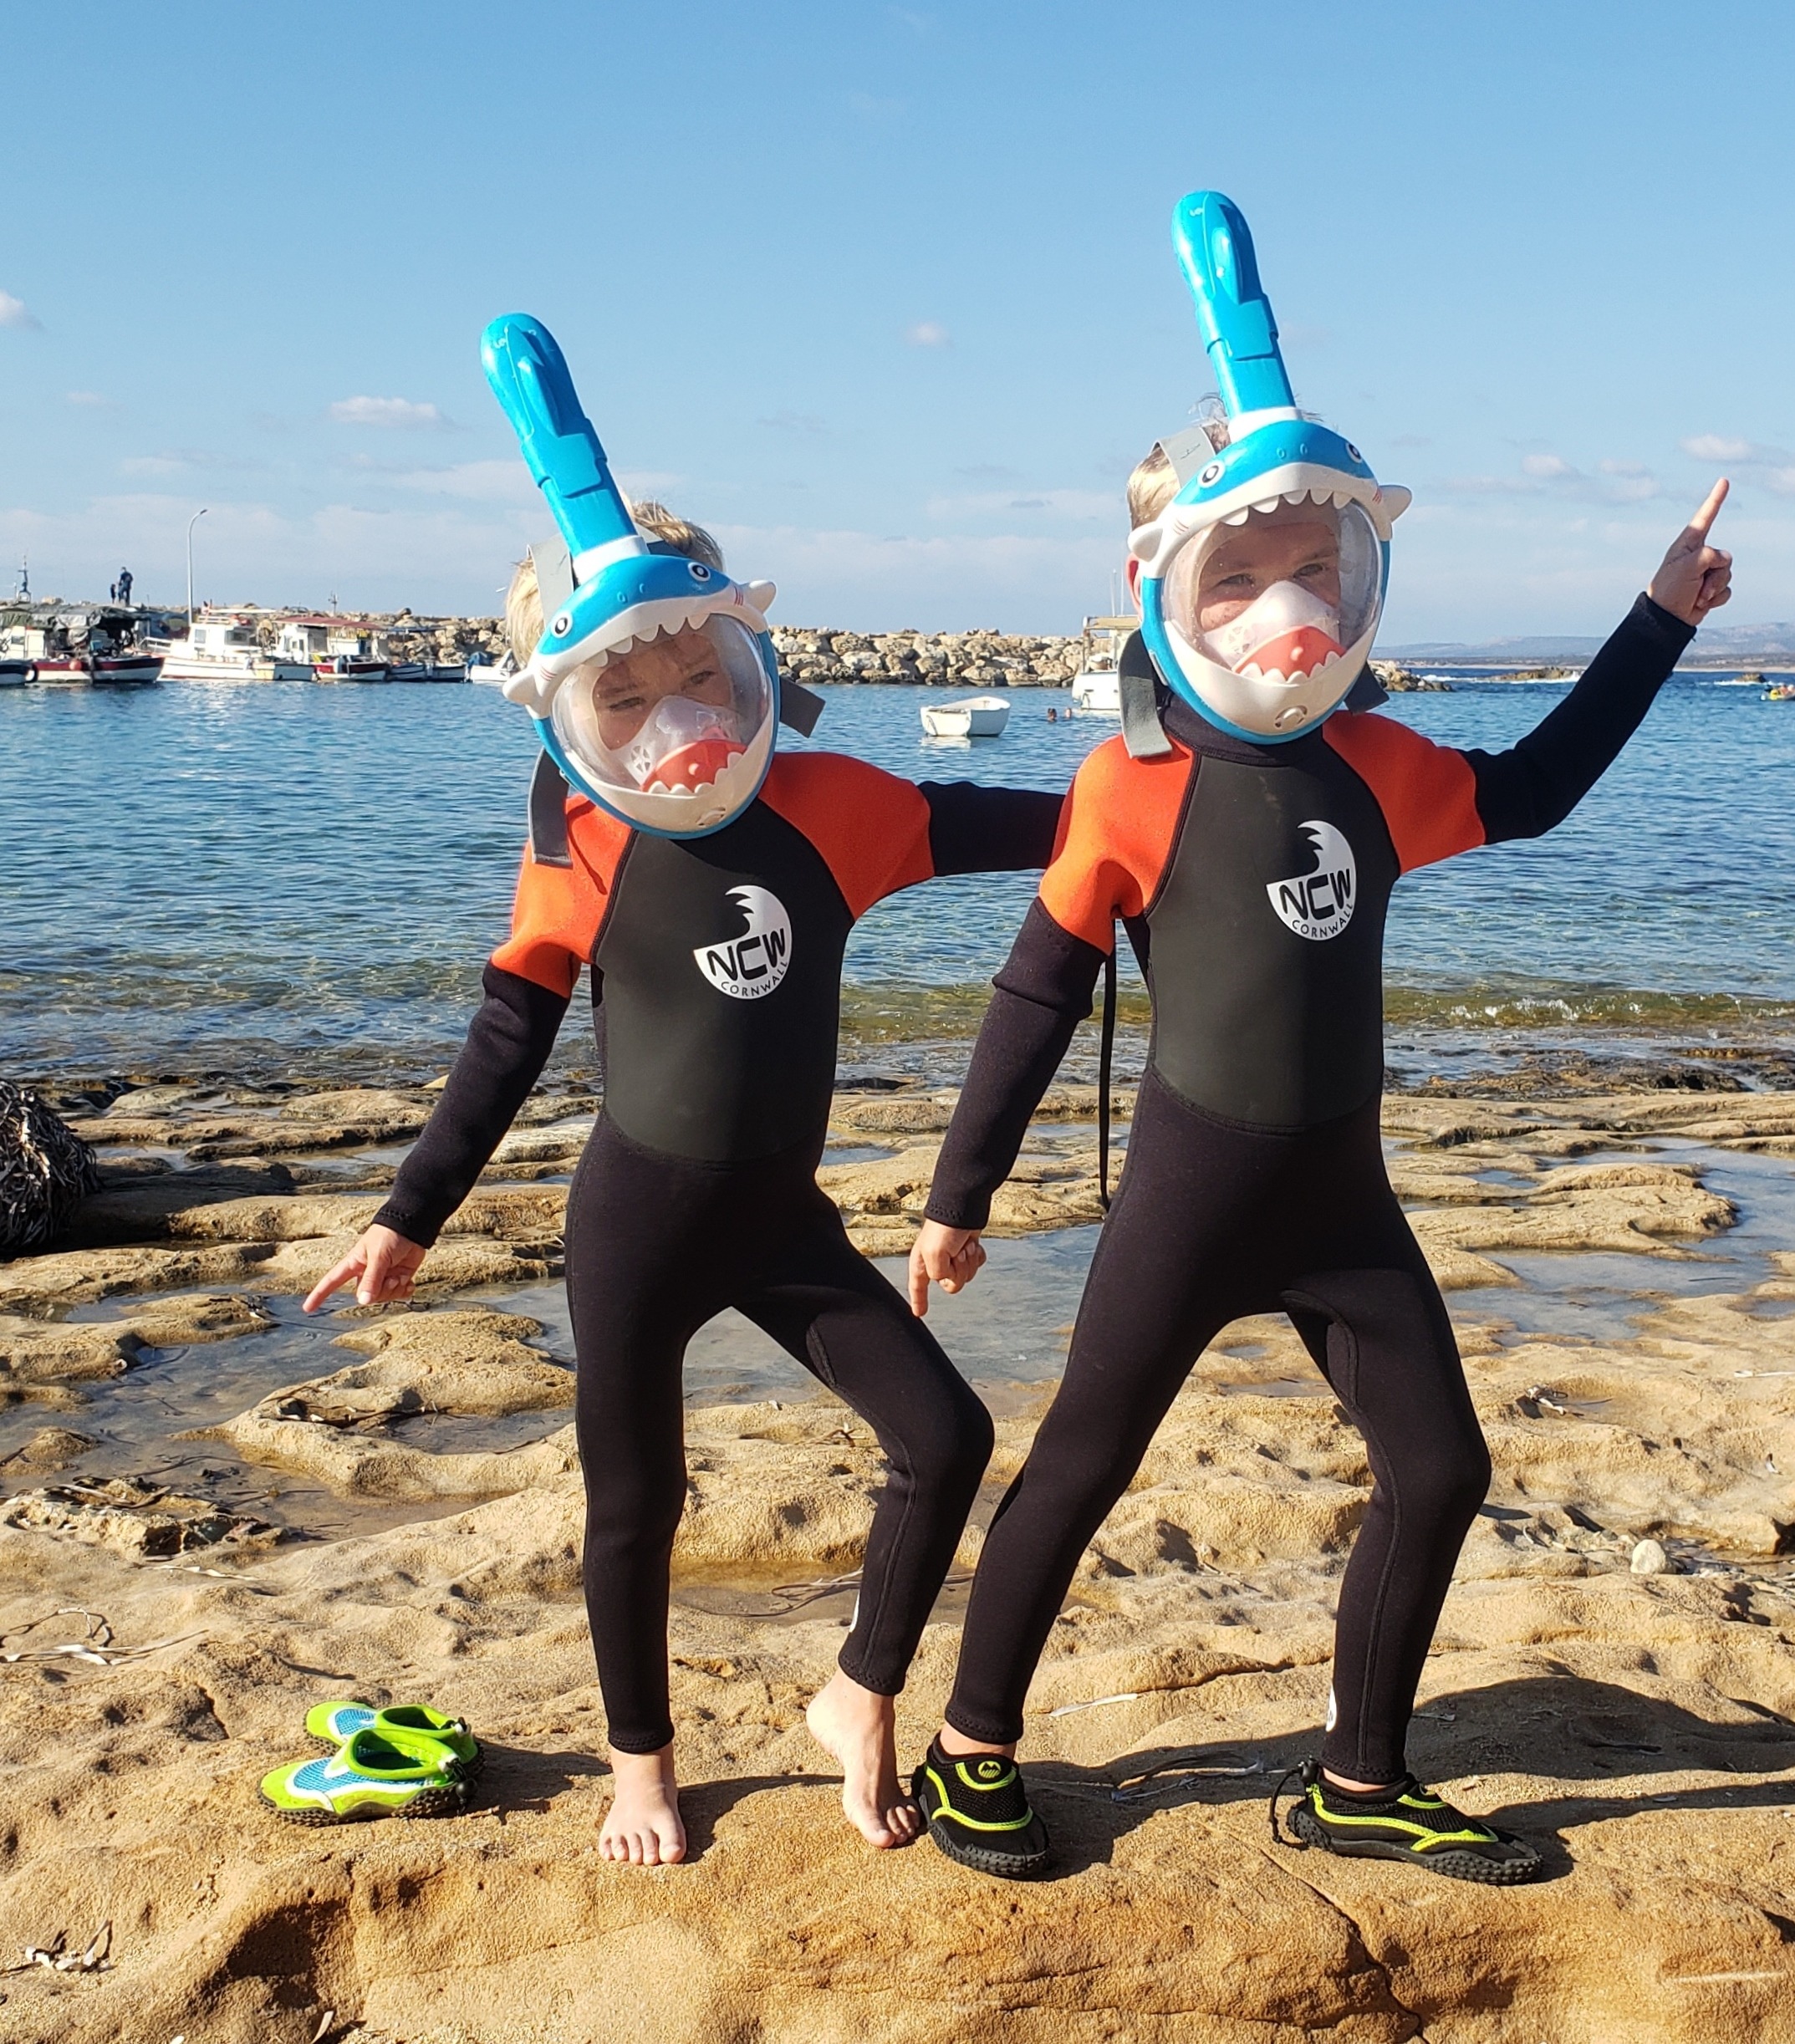 Size XXL most age 7-8yrs NEW Kids 3mm full wetsuit all watersports beach use 